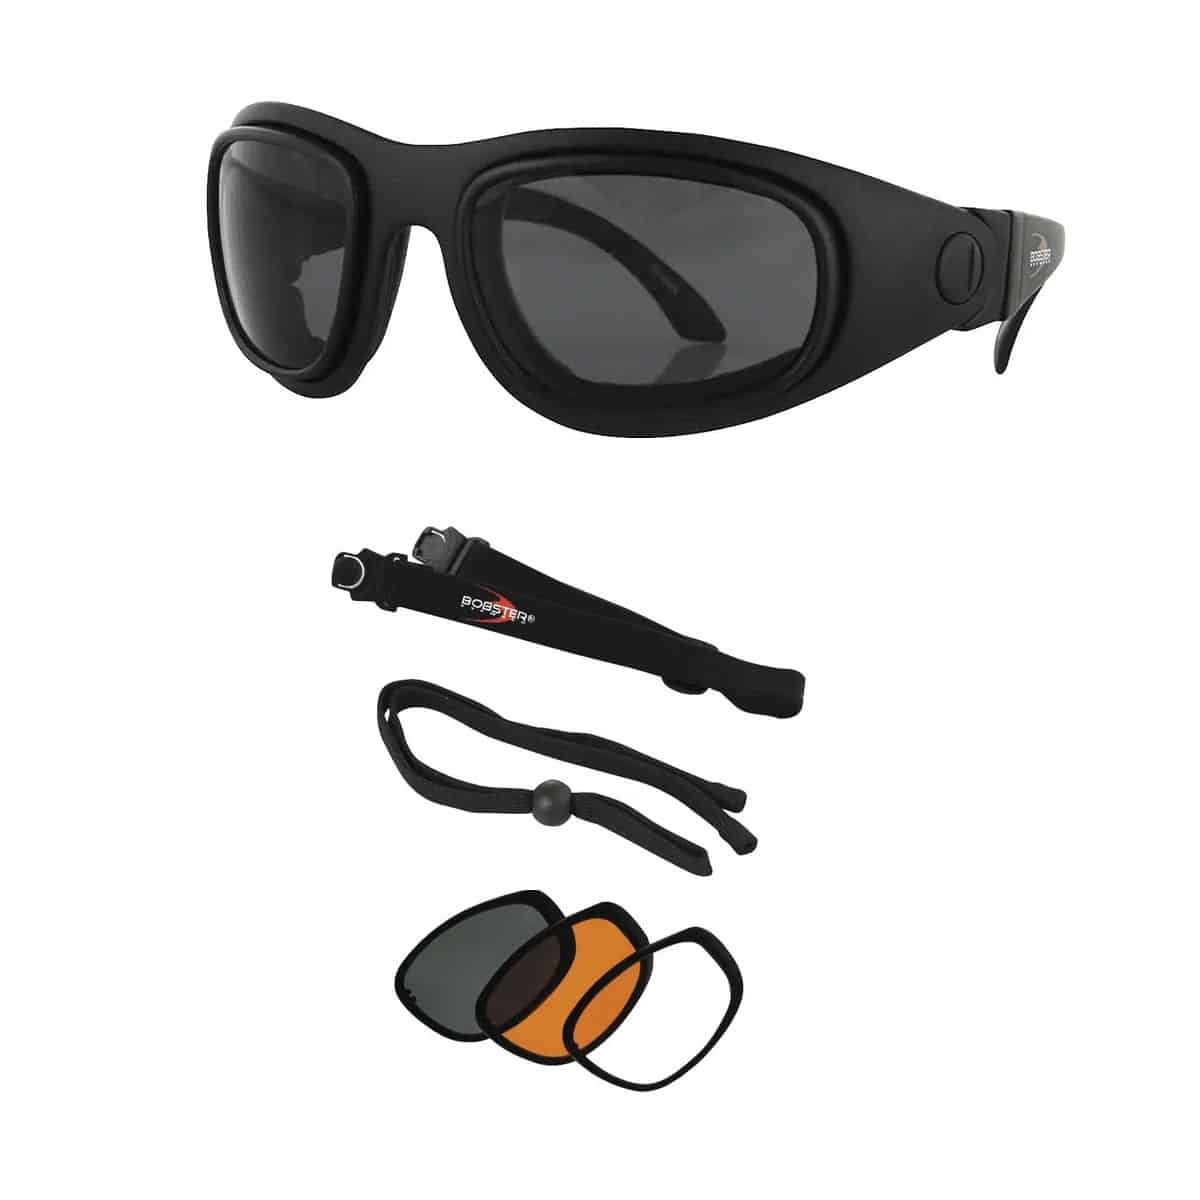 Get ready for the ultimate eyewear adventure with the Bobster Sport & Street II Sunglasses Goggles - Interchangeable! These awesome sunglasses can transform into goggles, adapting to any situation or activity.